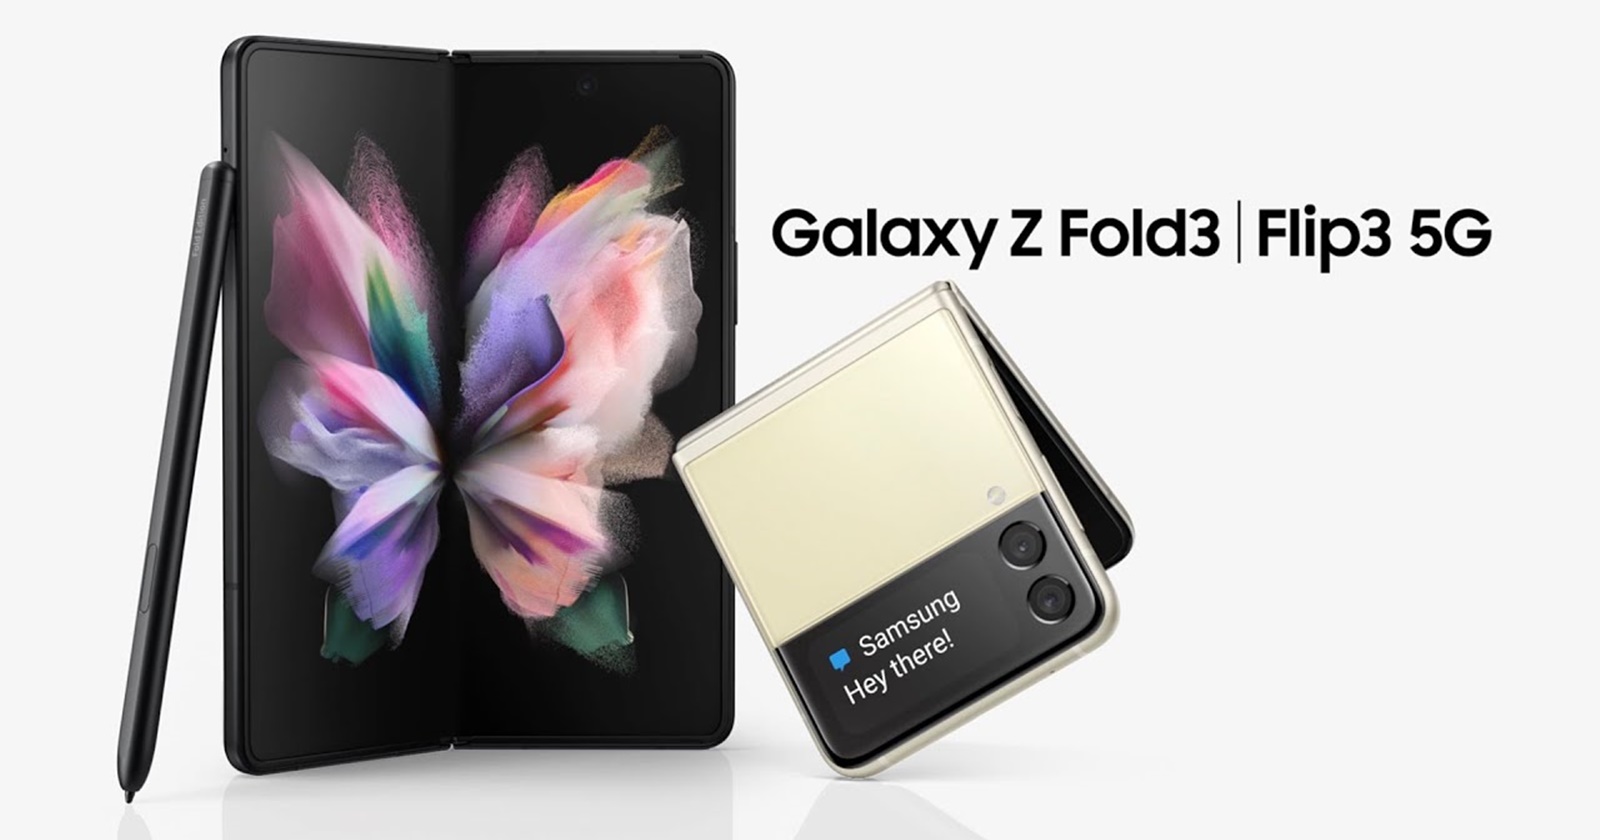 The Samsung Galaxy Z Fold 3 and Z Flip 3 are selling like hot cakes;  10 times more than Z Fold 2 in some areas